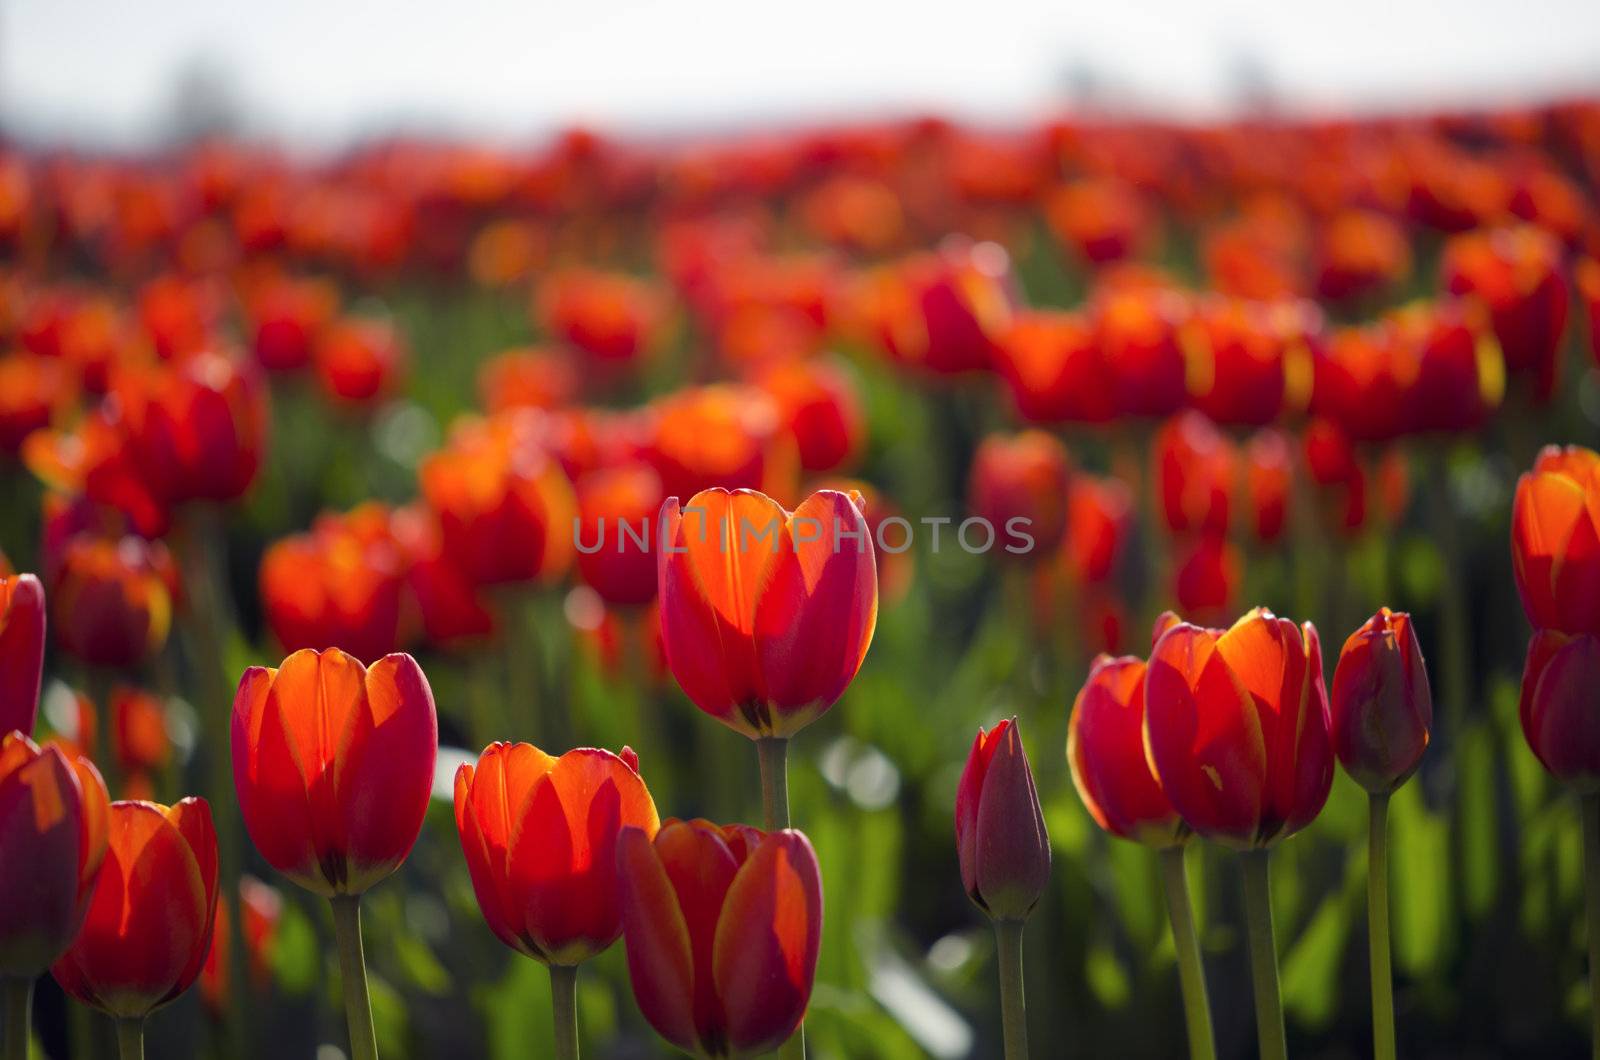 field of red tulips by seattlephoto